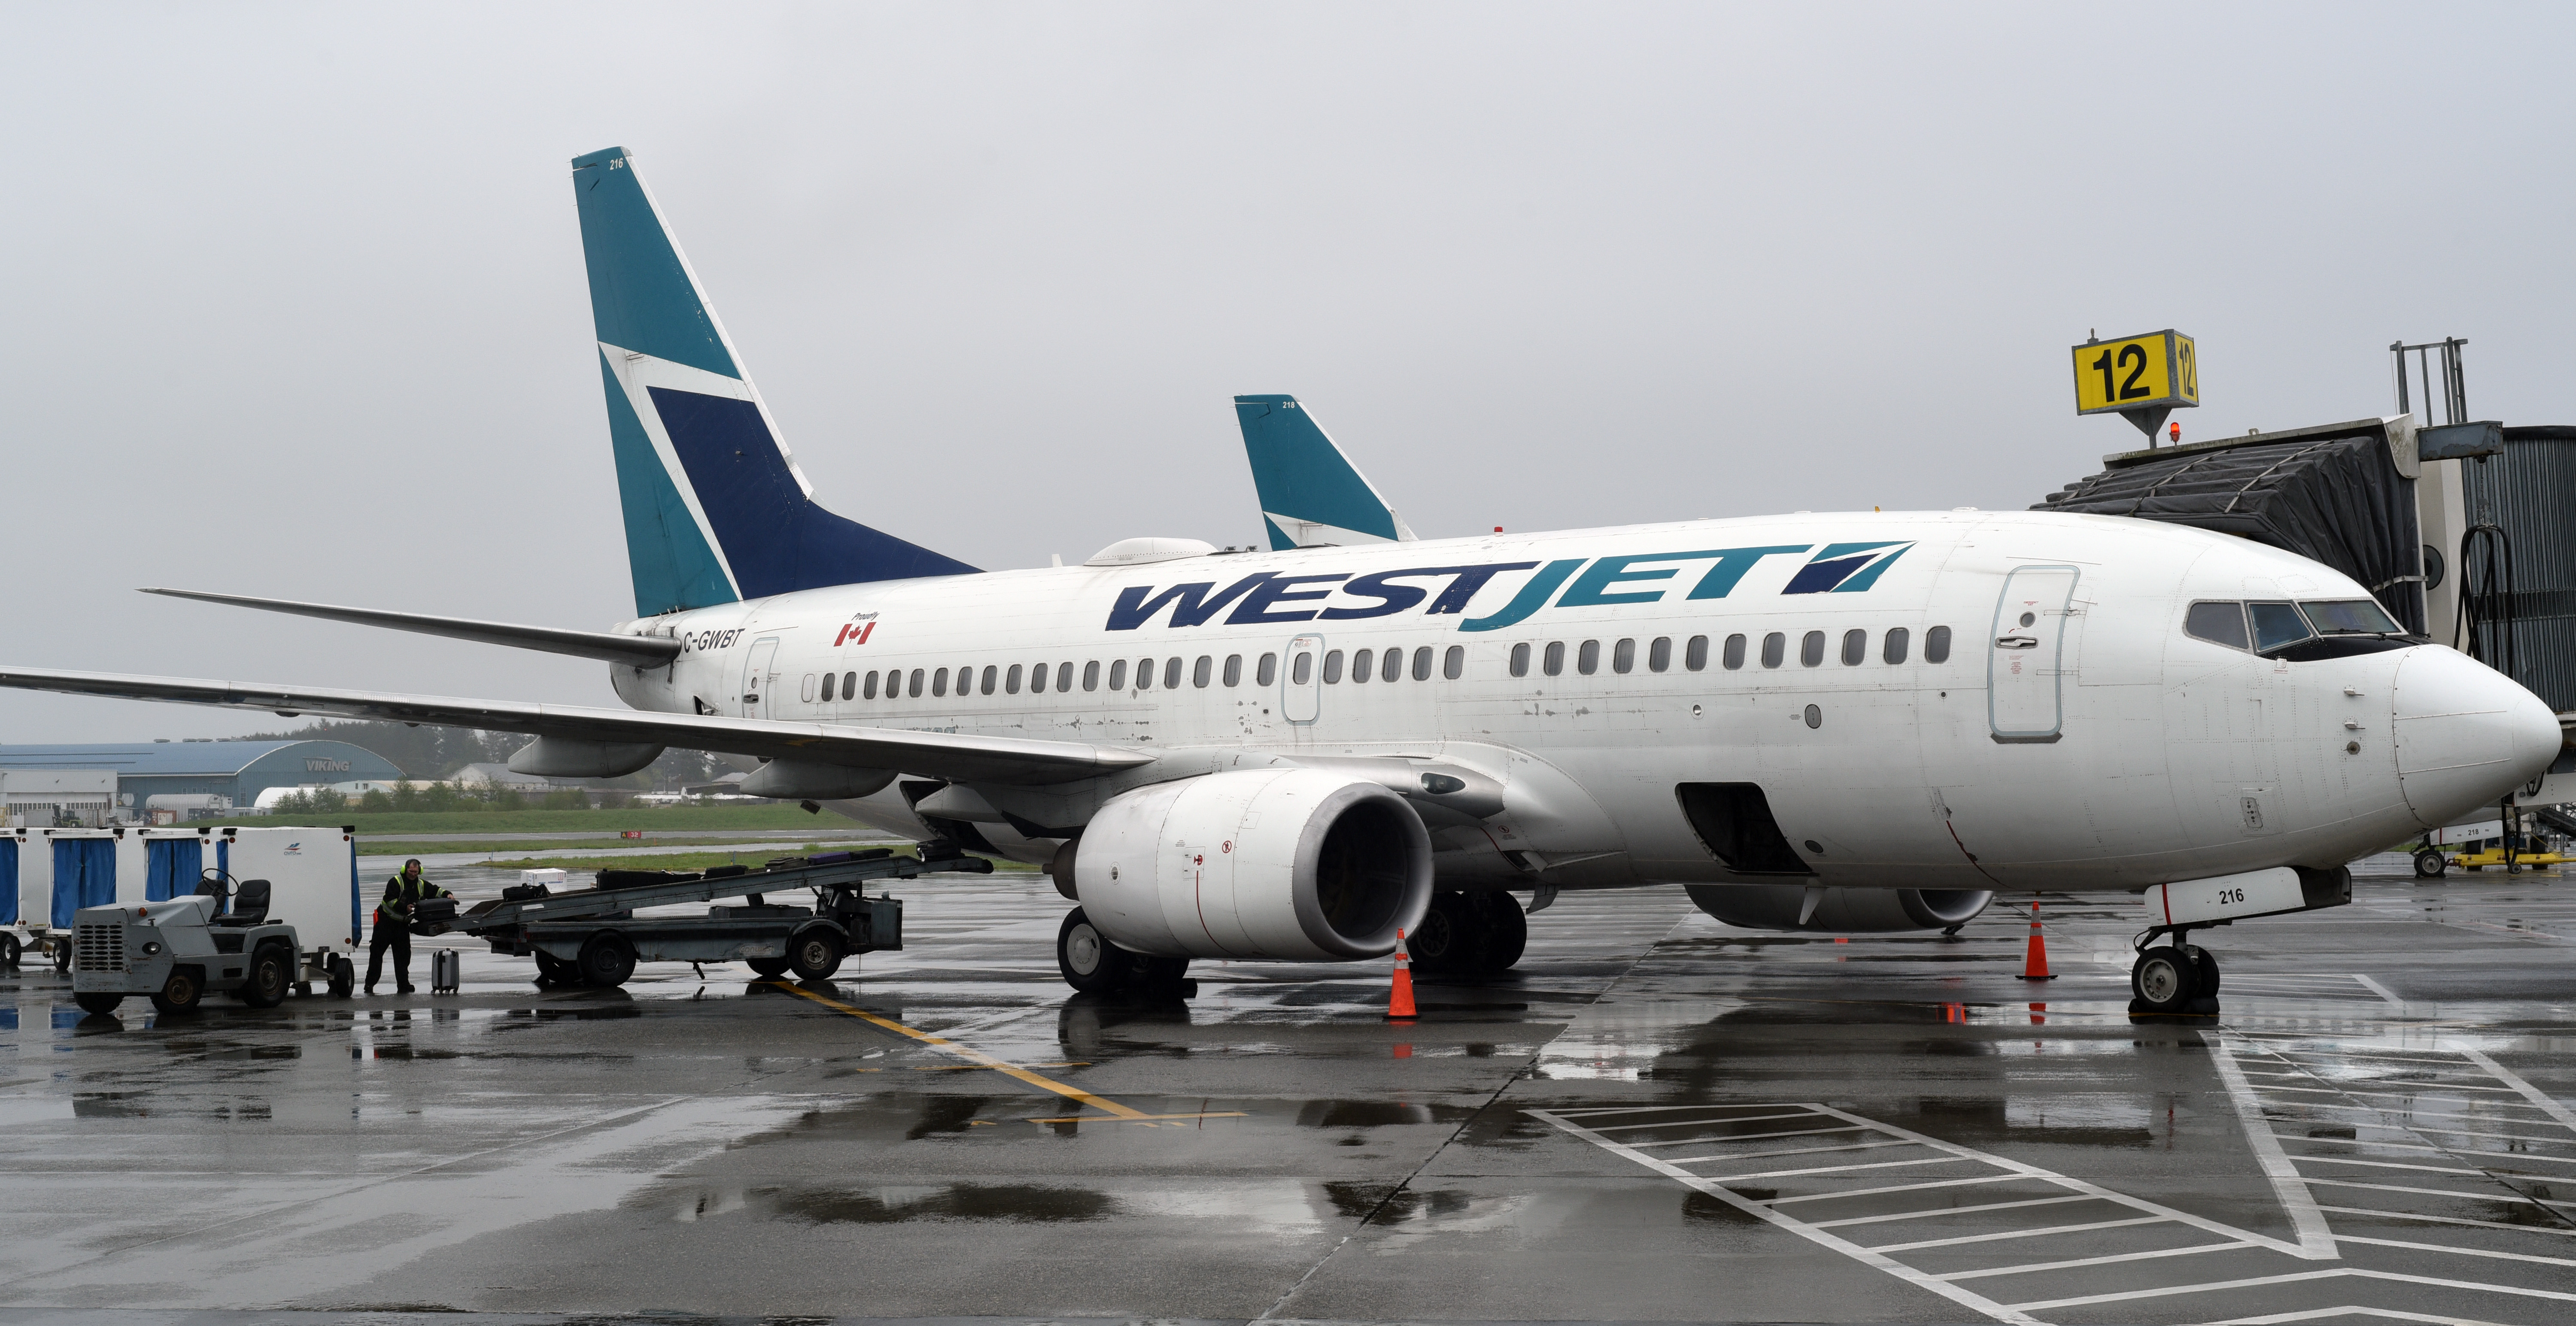 Flying WestJet over the long weekend? How a looming strike could affect you